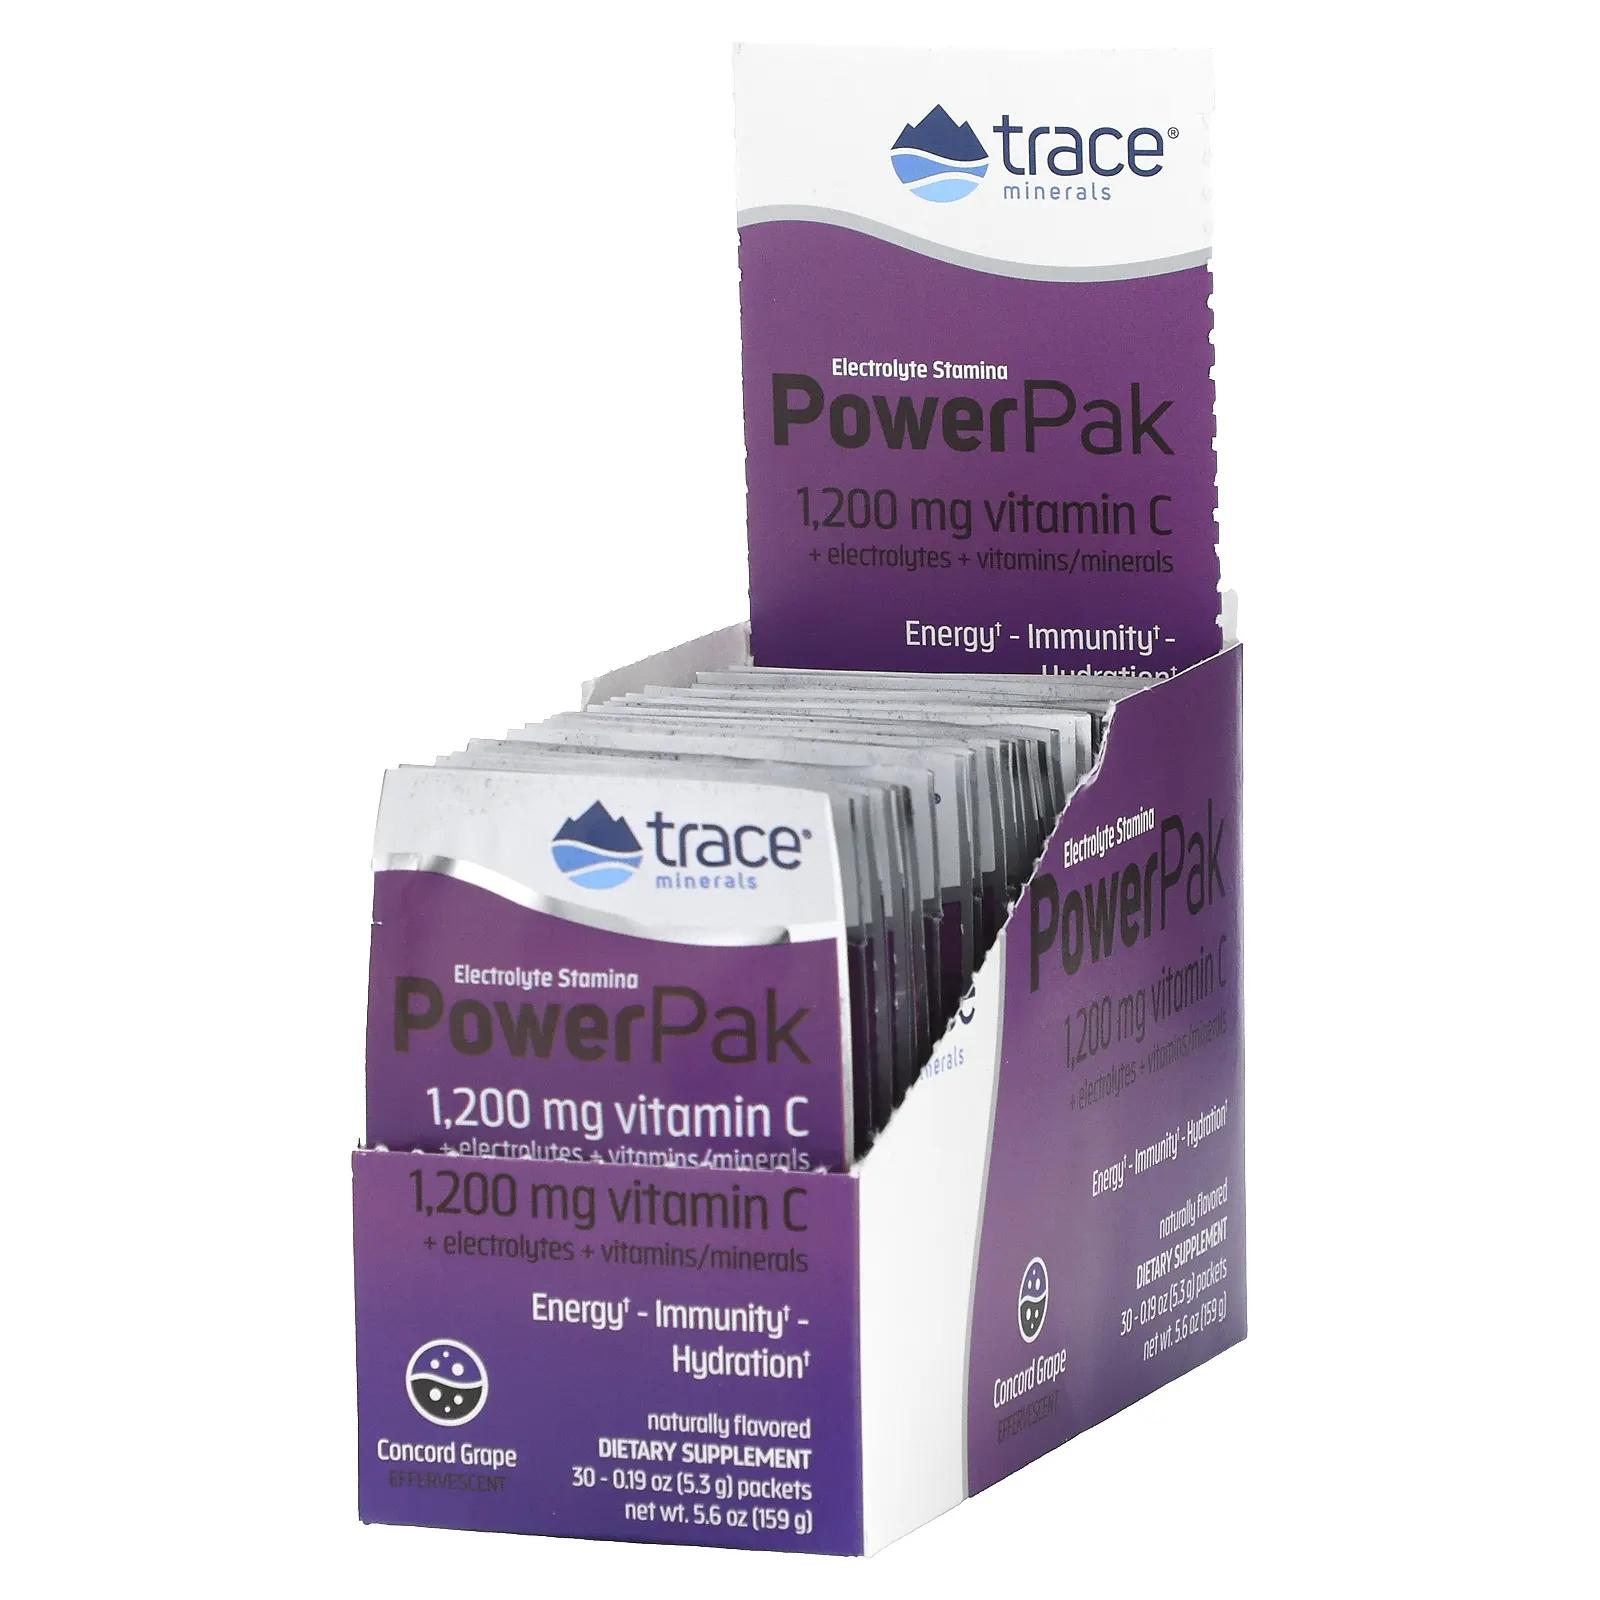 Trace Minerals Research Электролиты Stamina Power Pak виноград 1 200 мг 30 пакетов. 0,19 унц. (5,3 г) каждый trace minerals research калий 99 мг капли 59 мл